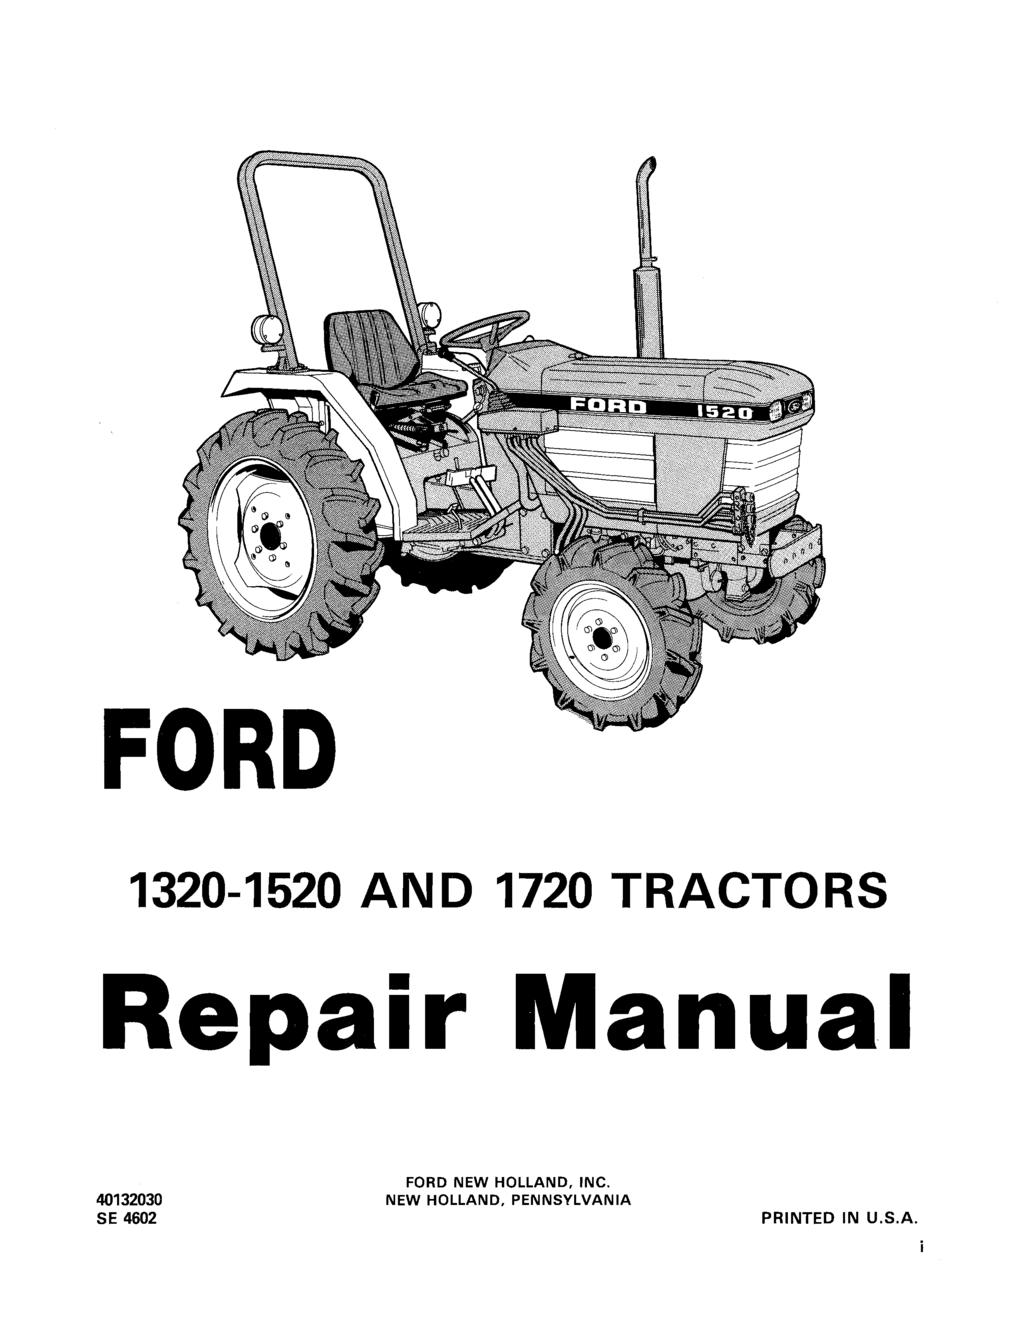 FORD 1320-1520 AN 1720 TRACT S Repair Manual 40132030